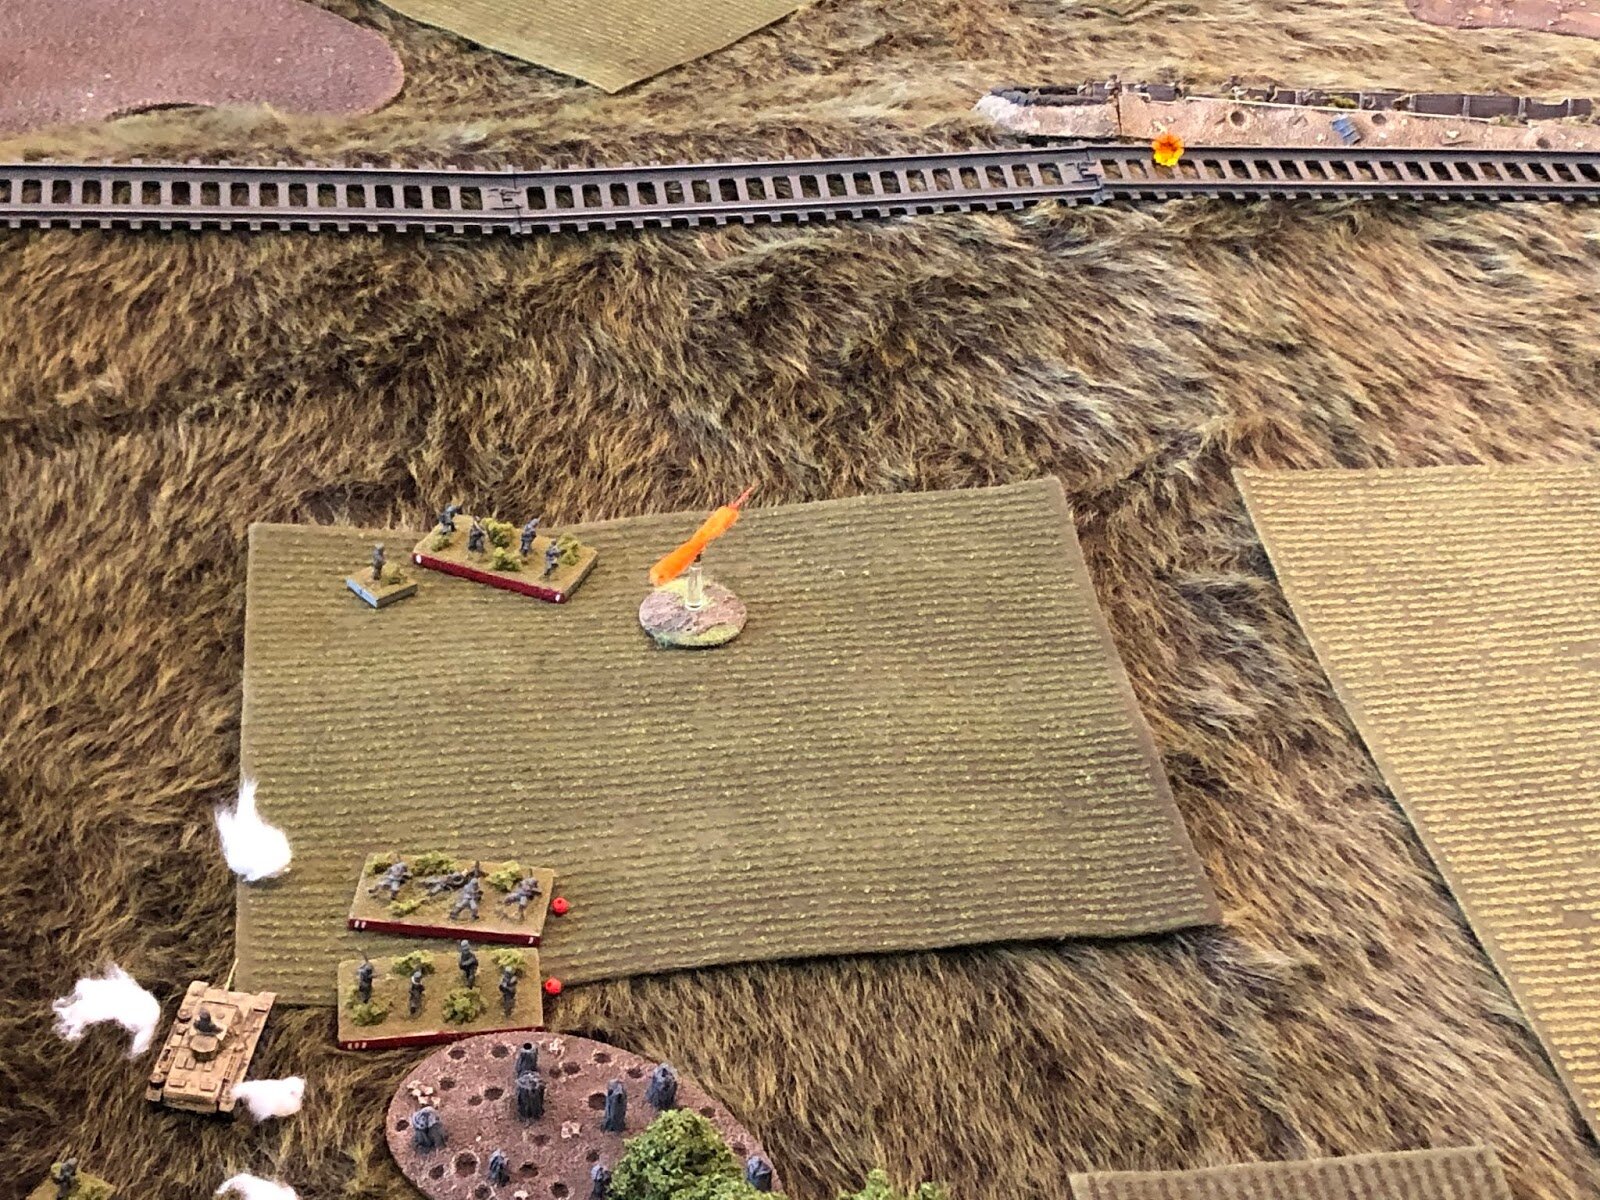  The German Panzer Platoon commander pushes his vehicle forward (bottom left) to support 2nd Company, and fires on the enemy railroad embankment position (top right)… 